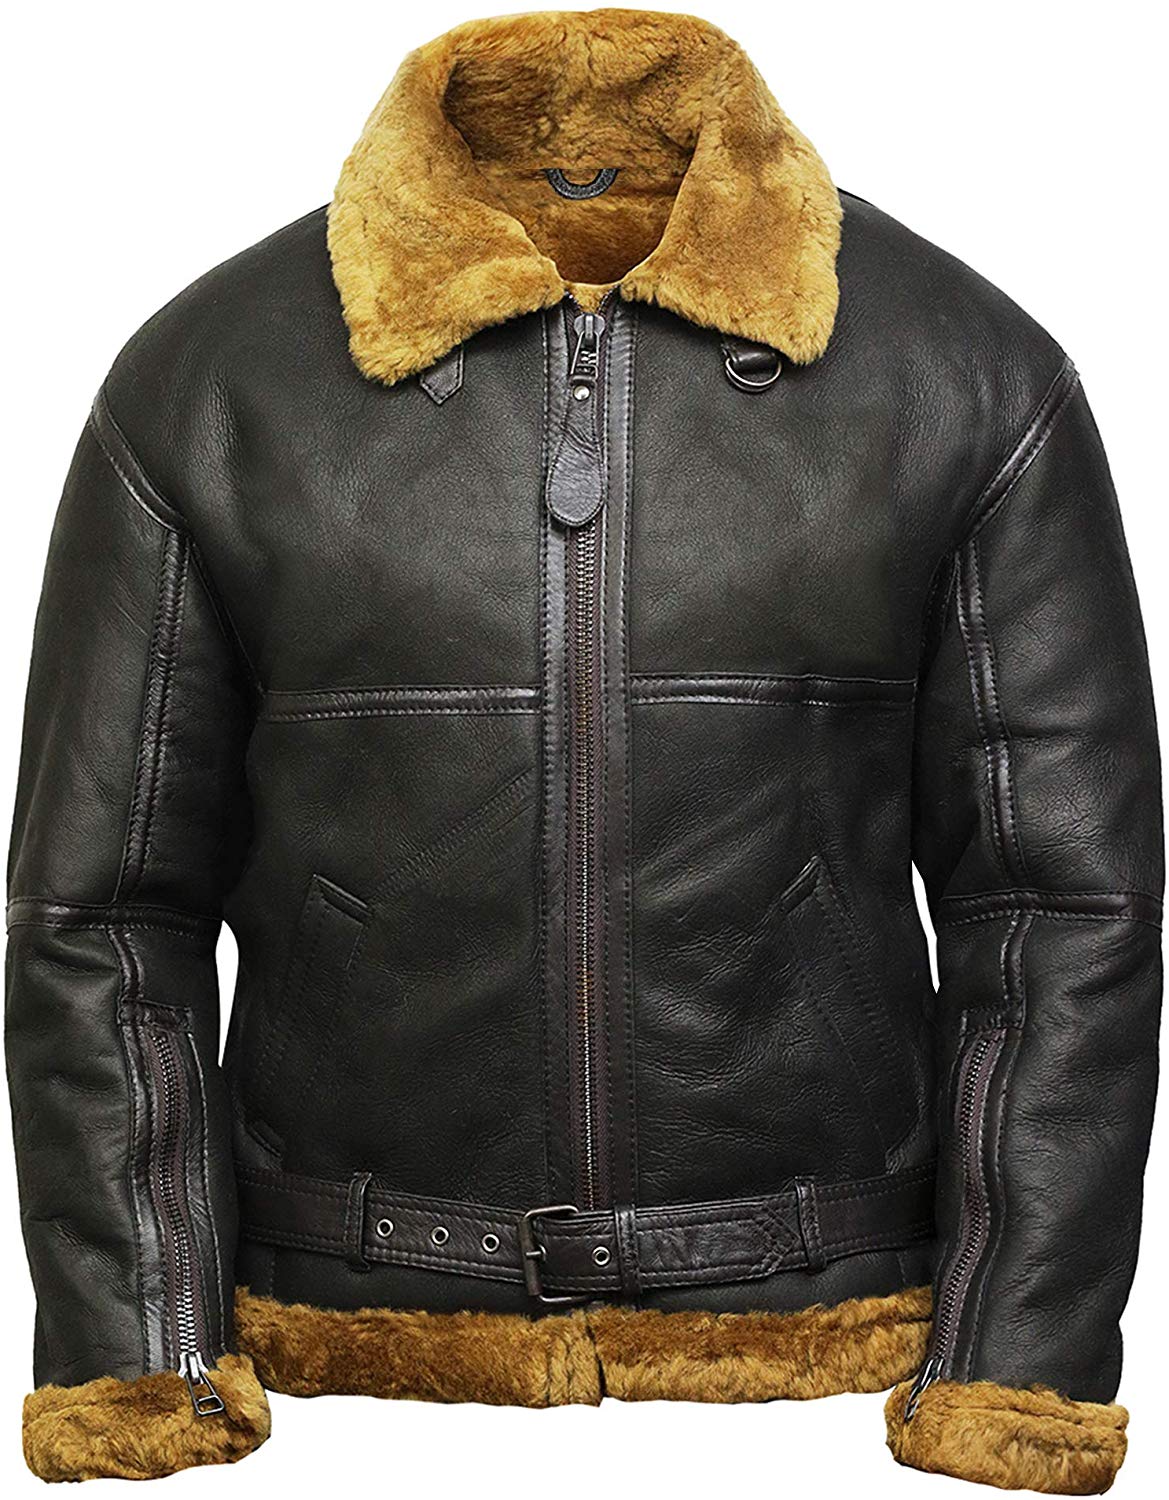 Shearling Leather Jackets Bomber Royal flying aviator | VearFit